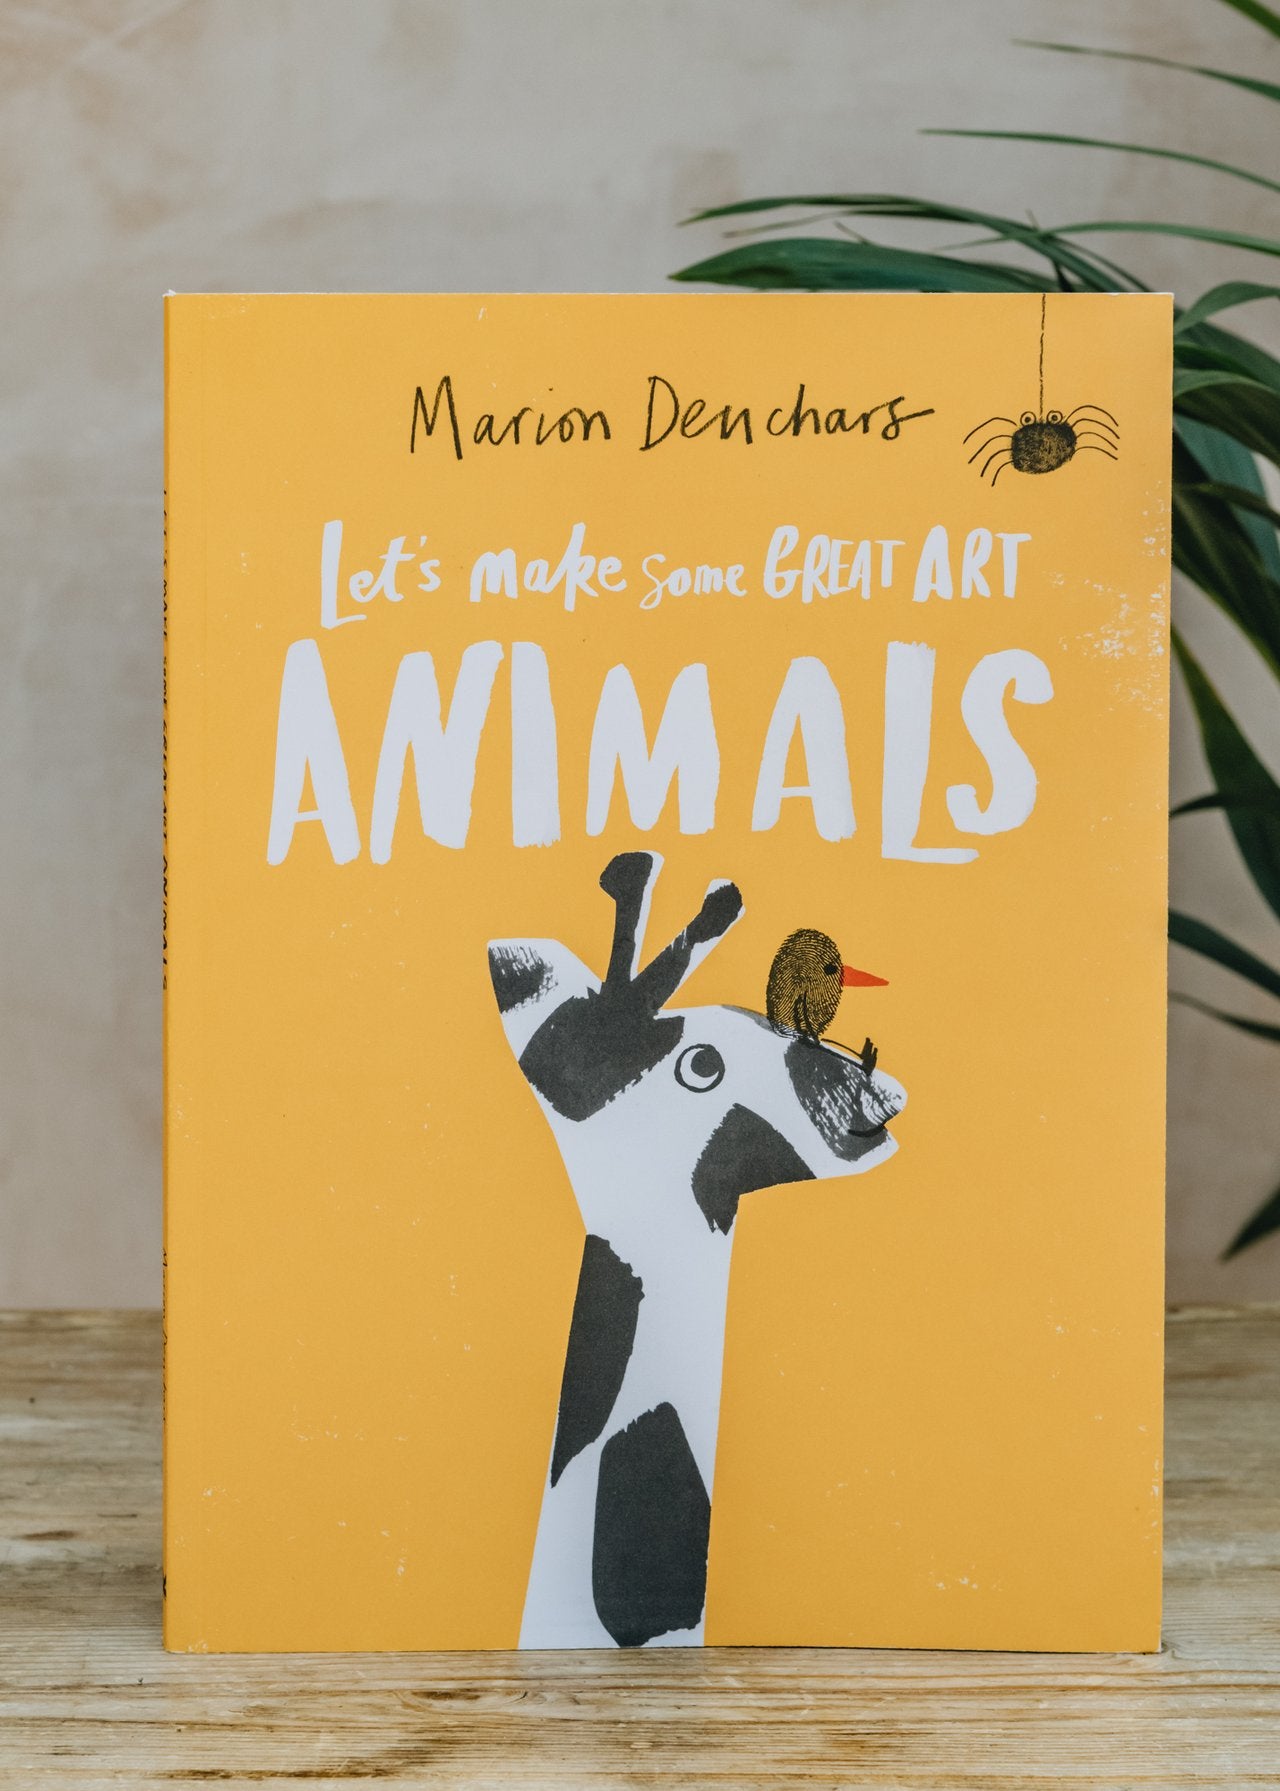 In Review: Let's Make Some Great Art Animals